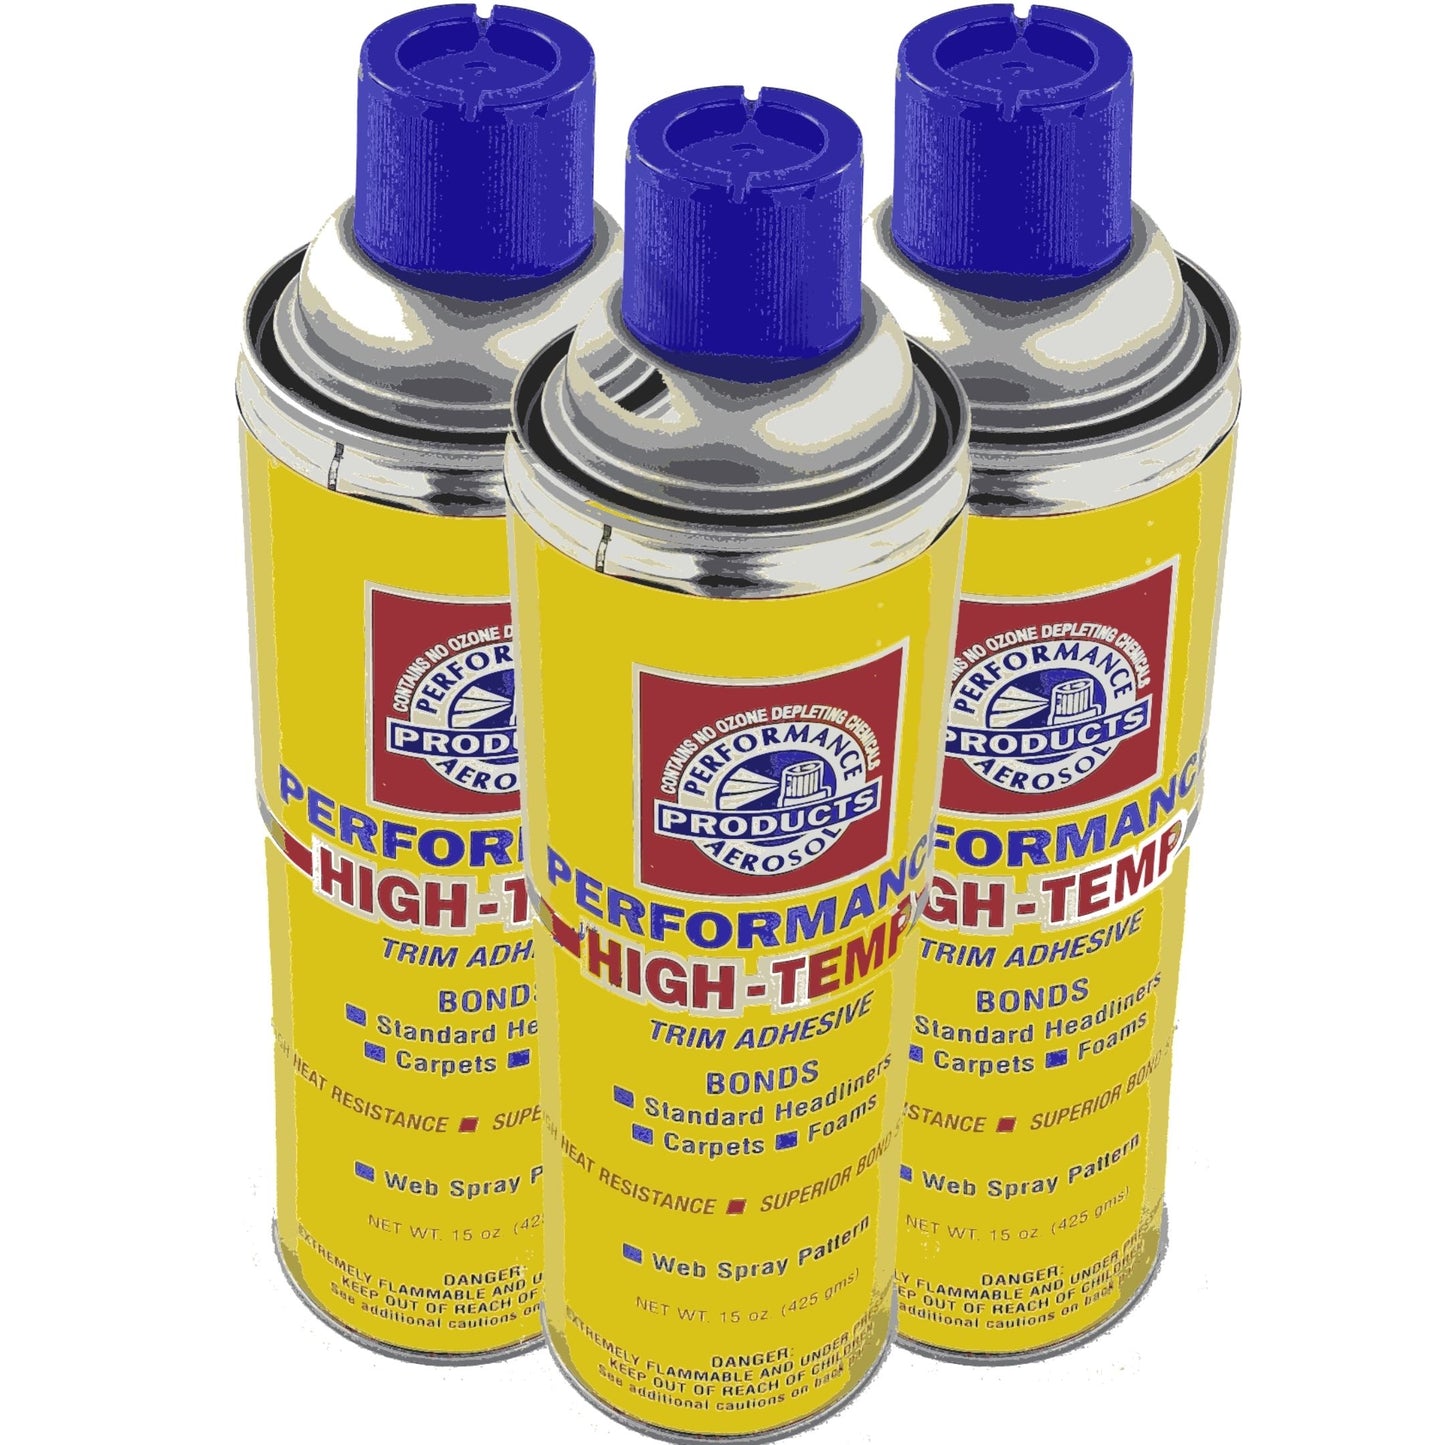 Spray Glue Adhesive Performance High Temp 12 OZ Cans of Headliners - Headliner Magic adhesive, cans, high, performance, spray, temp